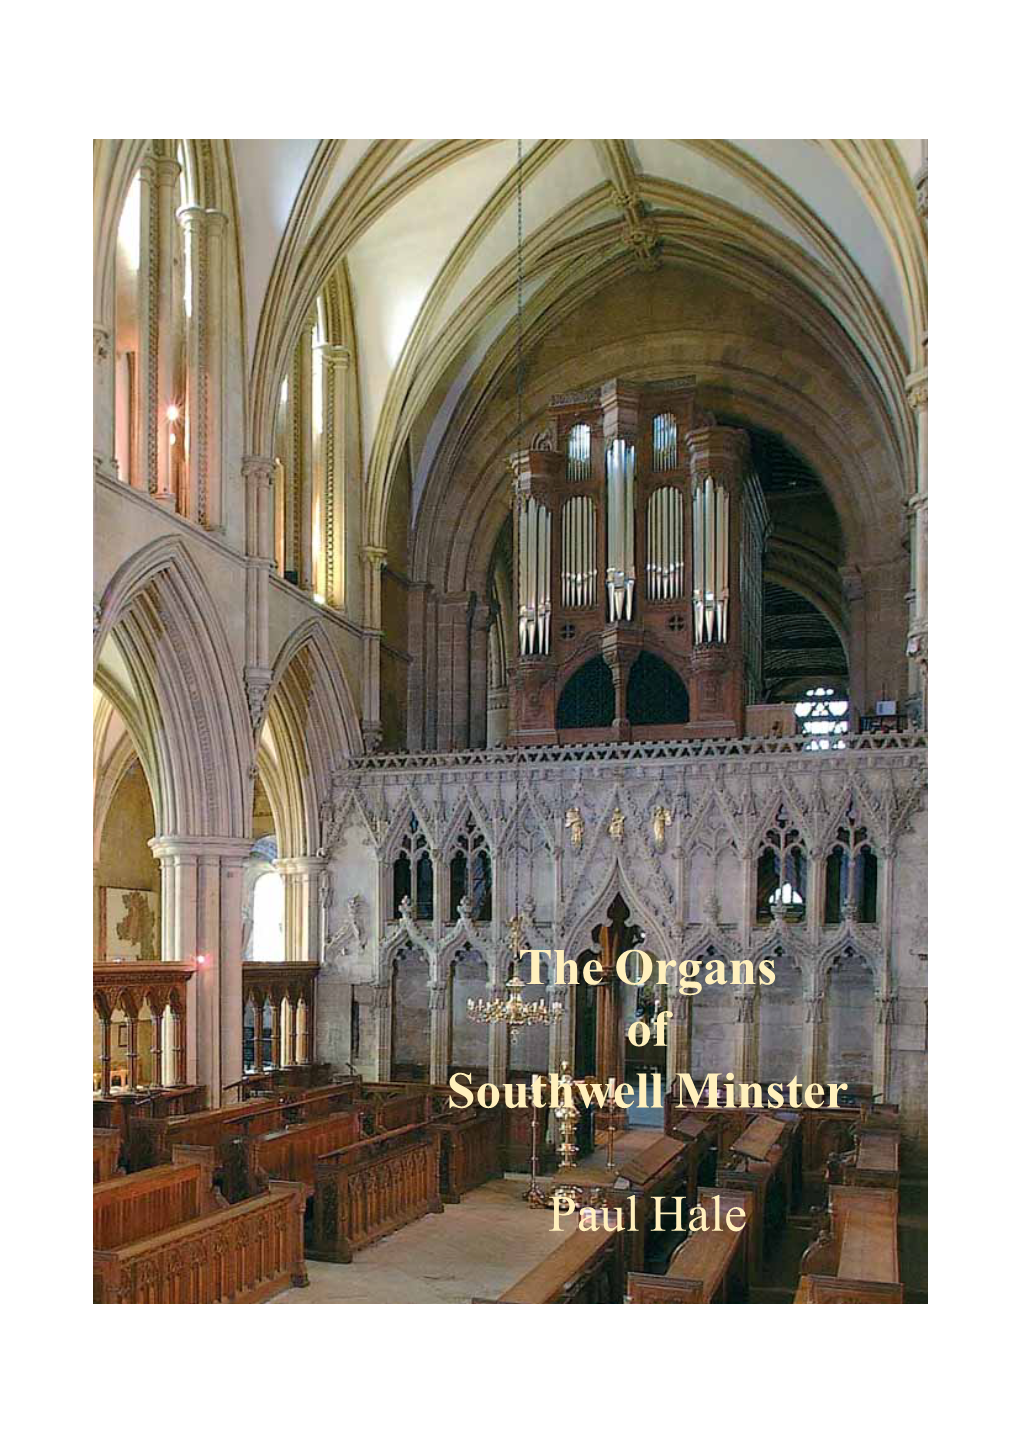 The Organs of Southwell Minster Paul Hale